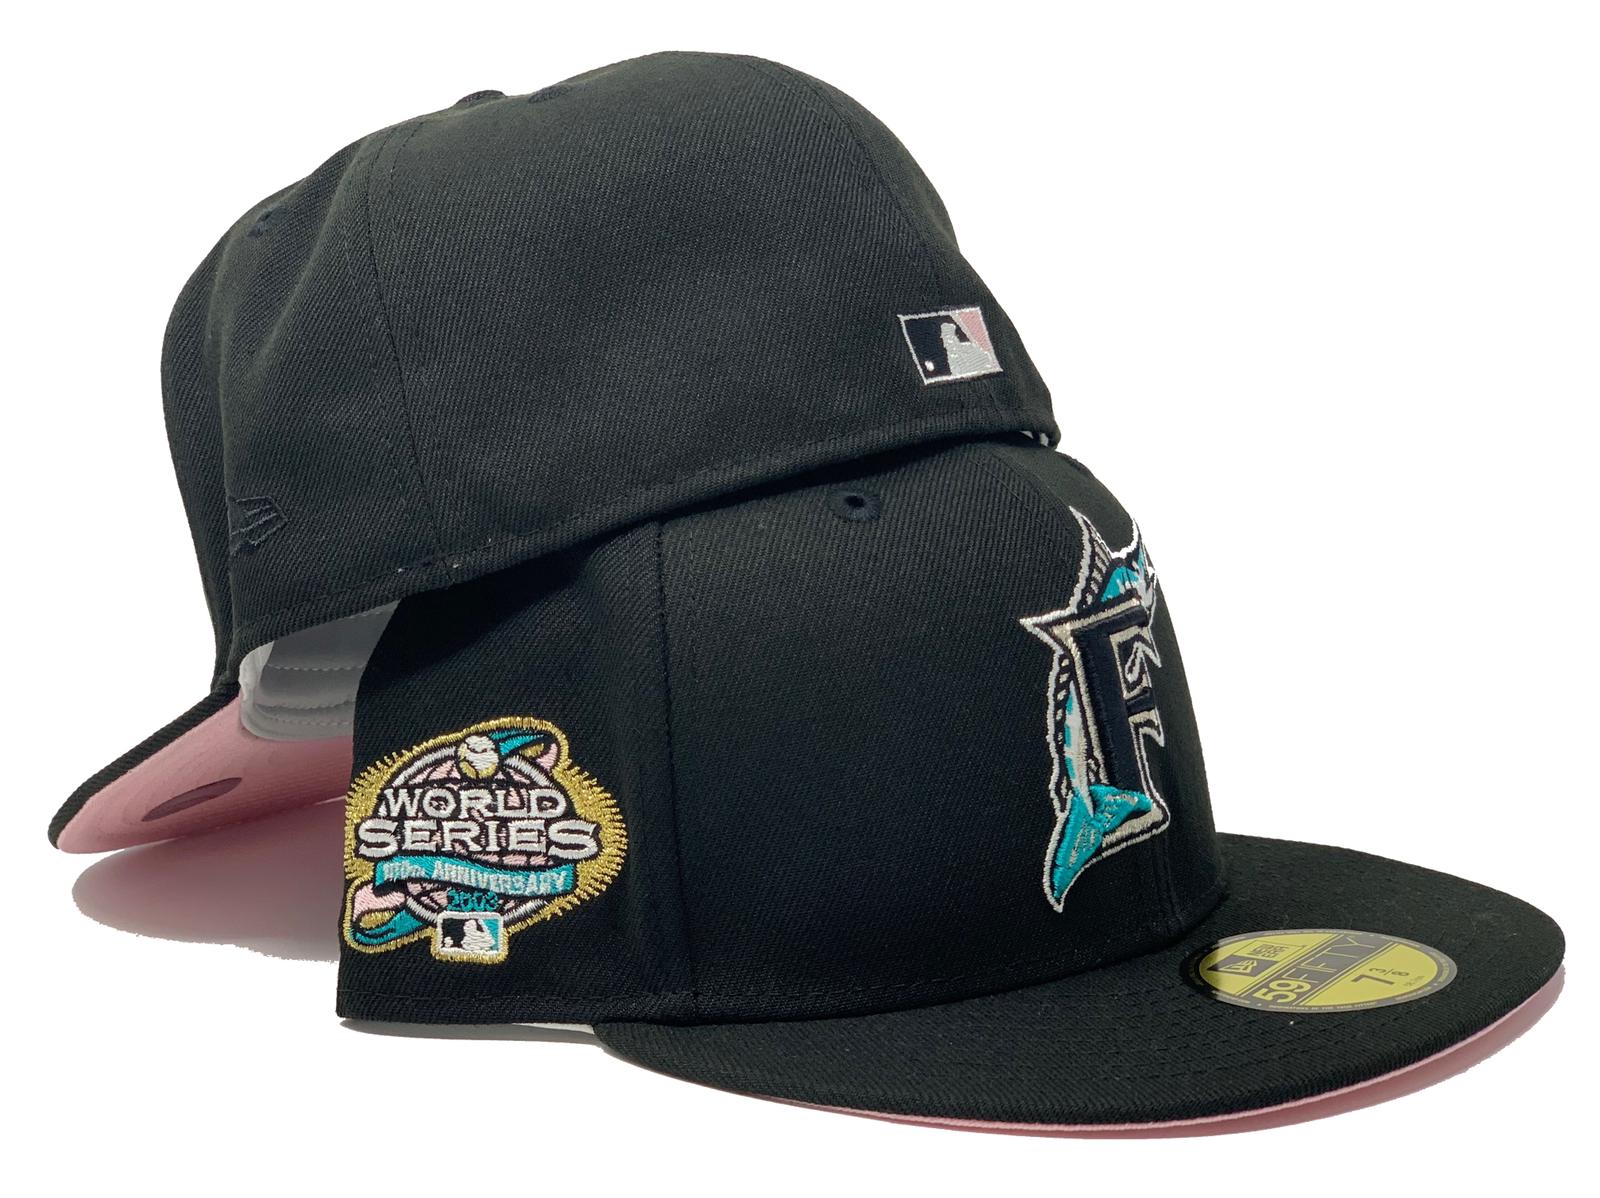 Men's Black, Pink Florida Marlins 2003 World Series Champions Passion  59FIFTY Fitted Hat